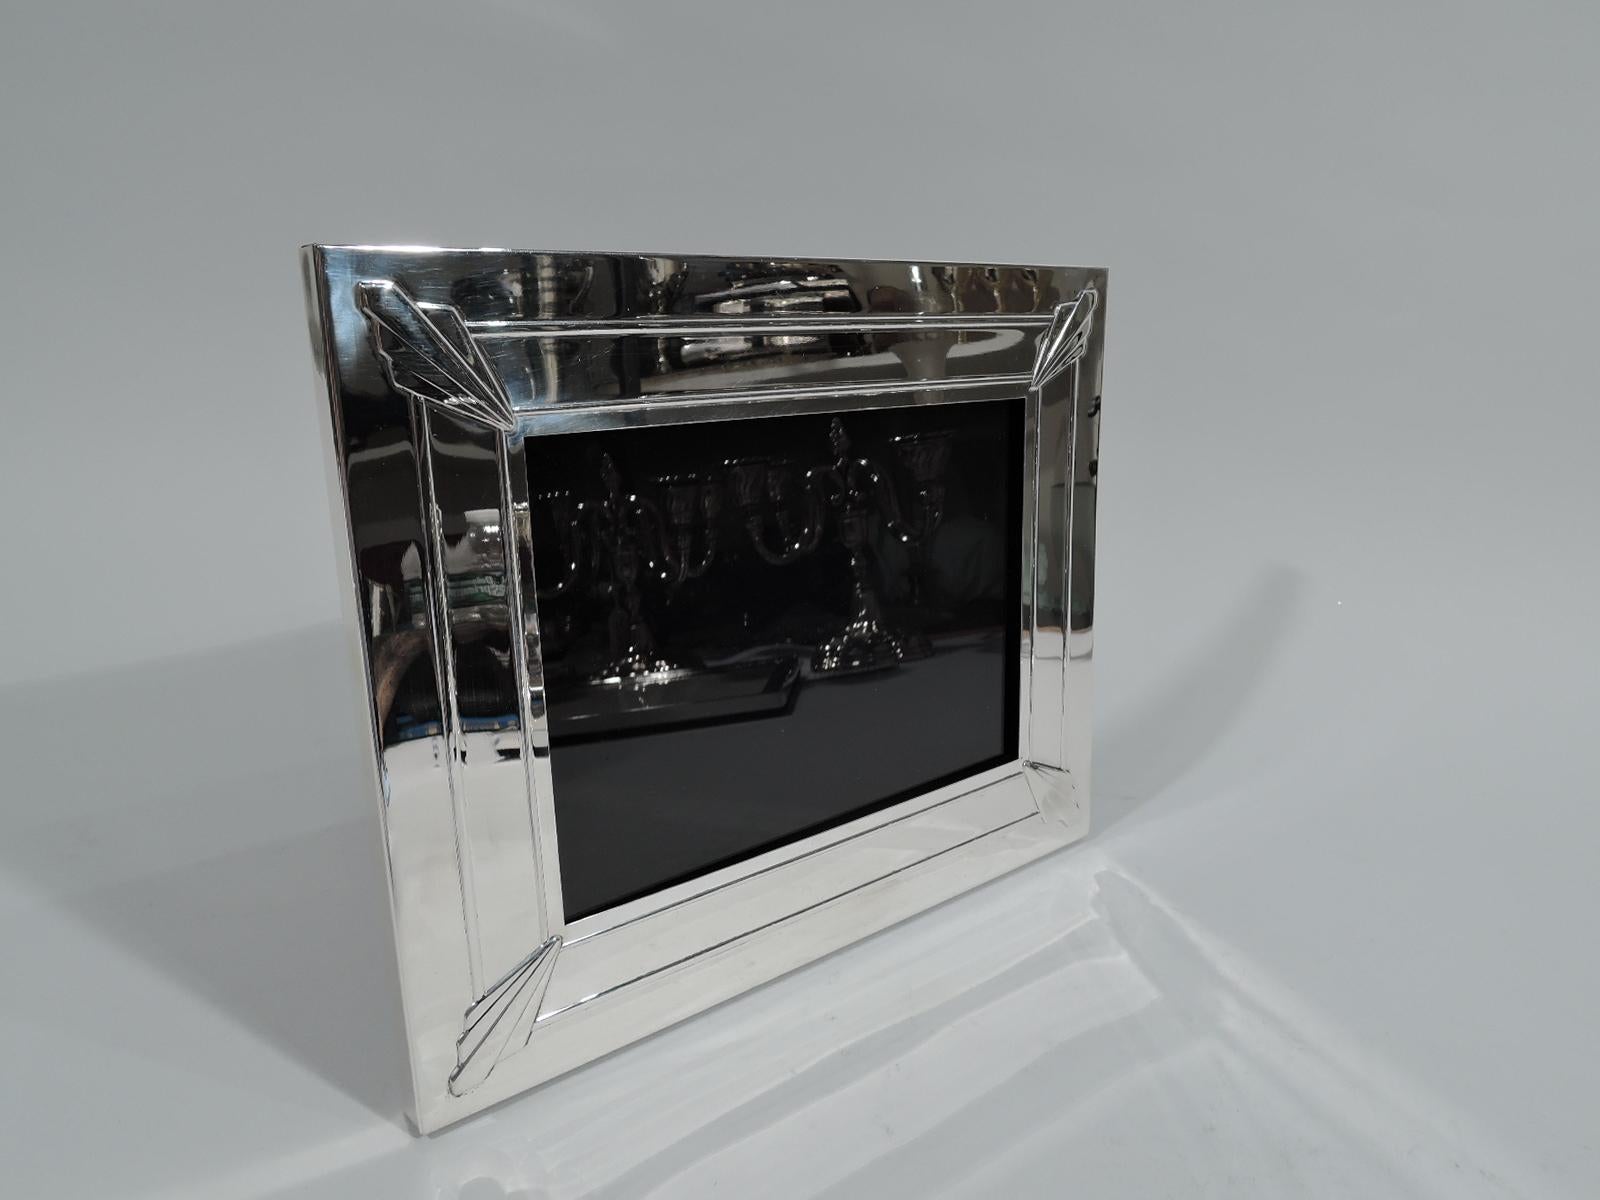 Sharp and Modern sterling silver picture frame. Made by Lunt in Greenfield, Mass, circa 1940. Rectangular window and wide surround with two raised wraparound bands and skyscraper arrows applied at corners. With glass, black lining, and black velvet